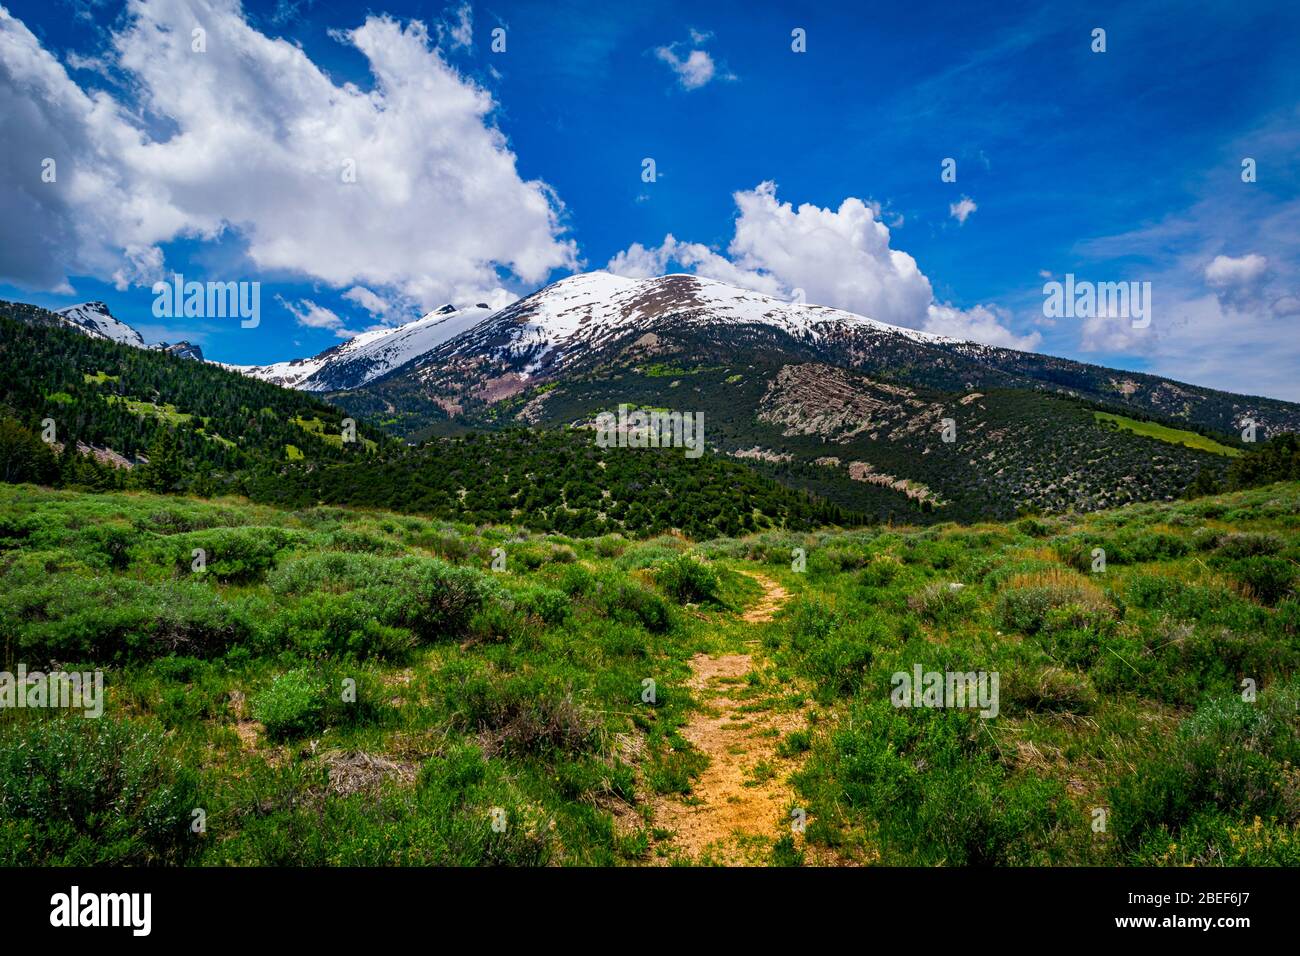 Majestic Wheeler Peak rises up along the Pole Canyon Trail as it opens to an alpine-like meadow. Stock Photo